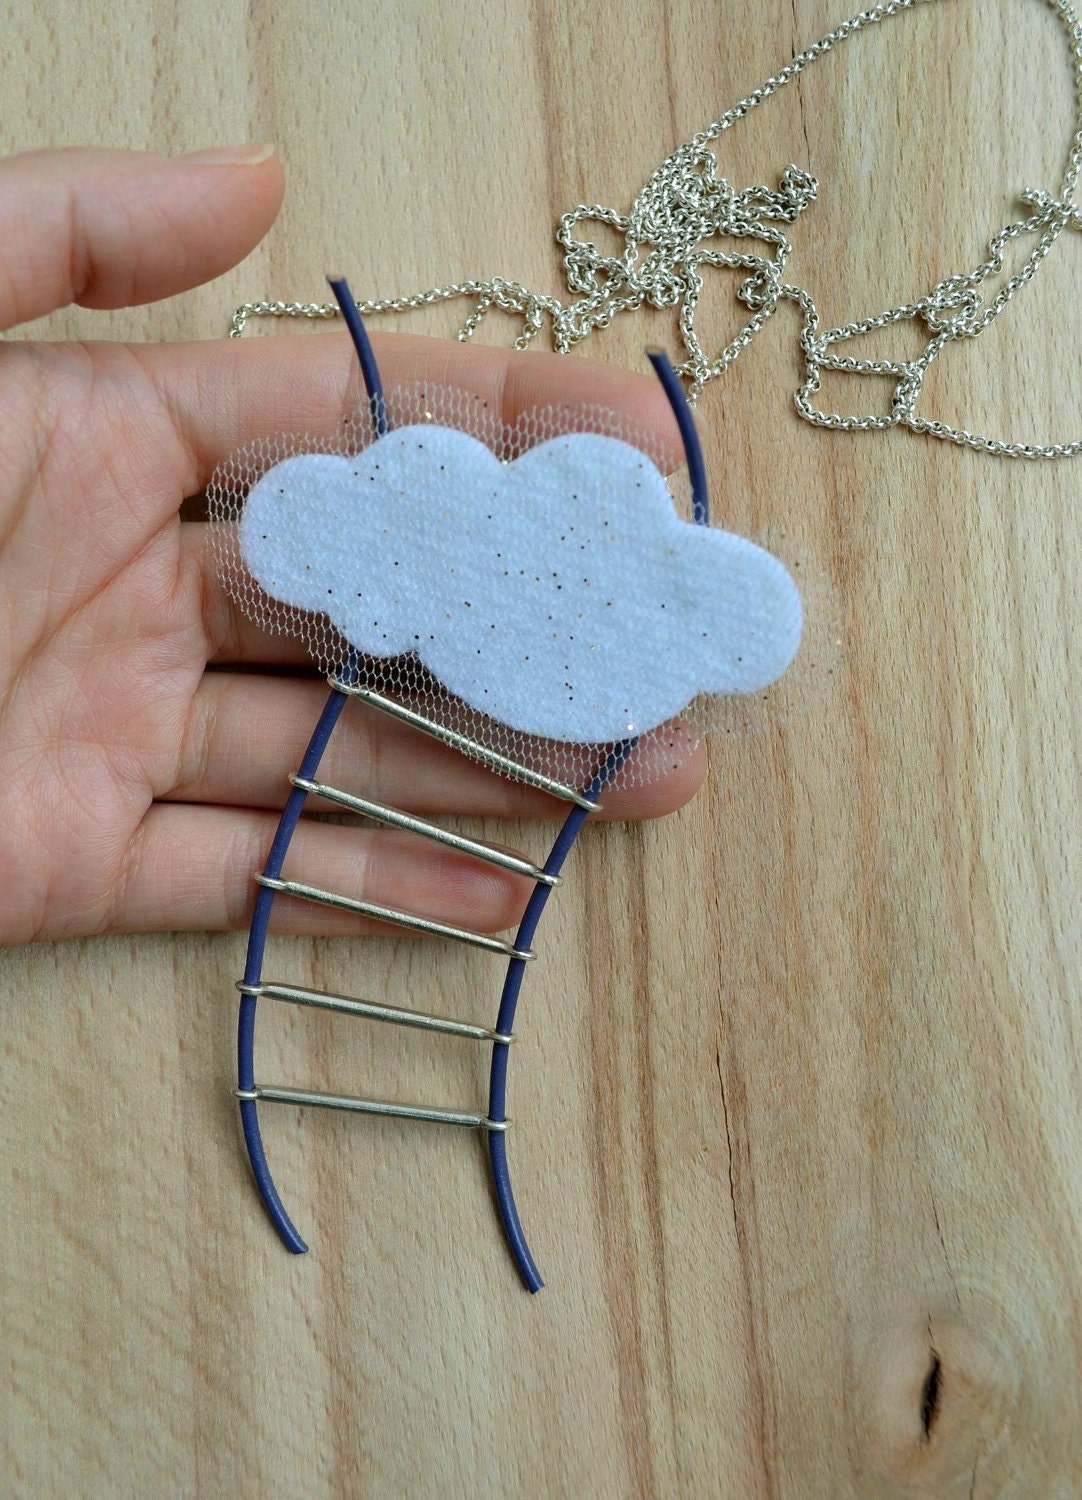 Felt Cloud Necklace with Stairs - greenaccordion